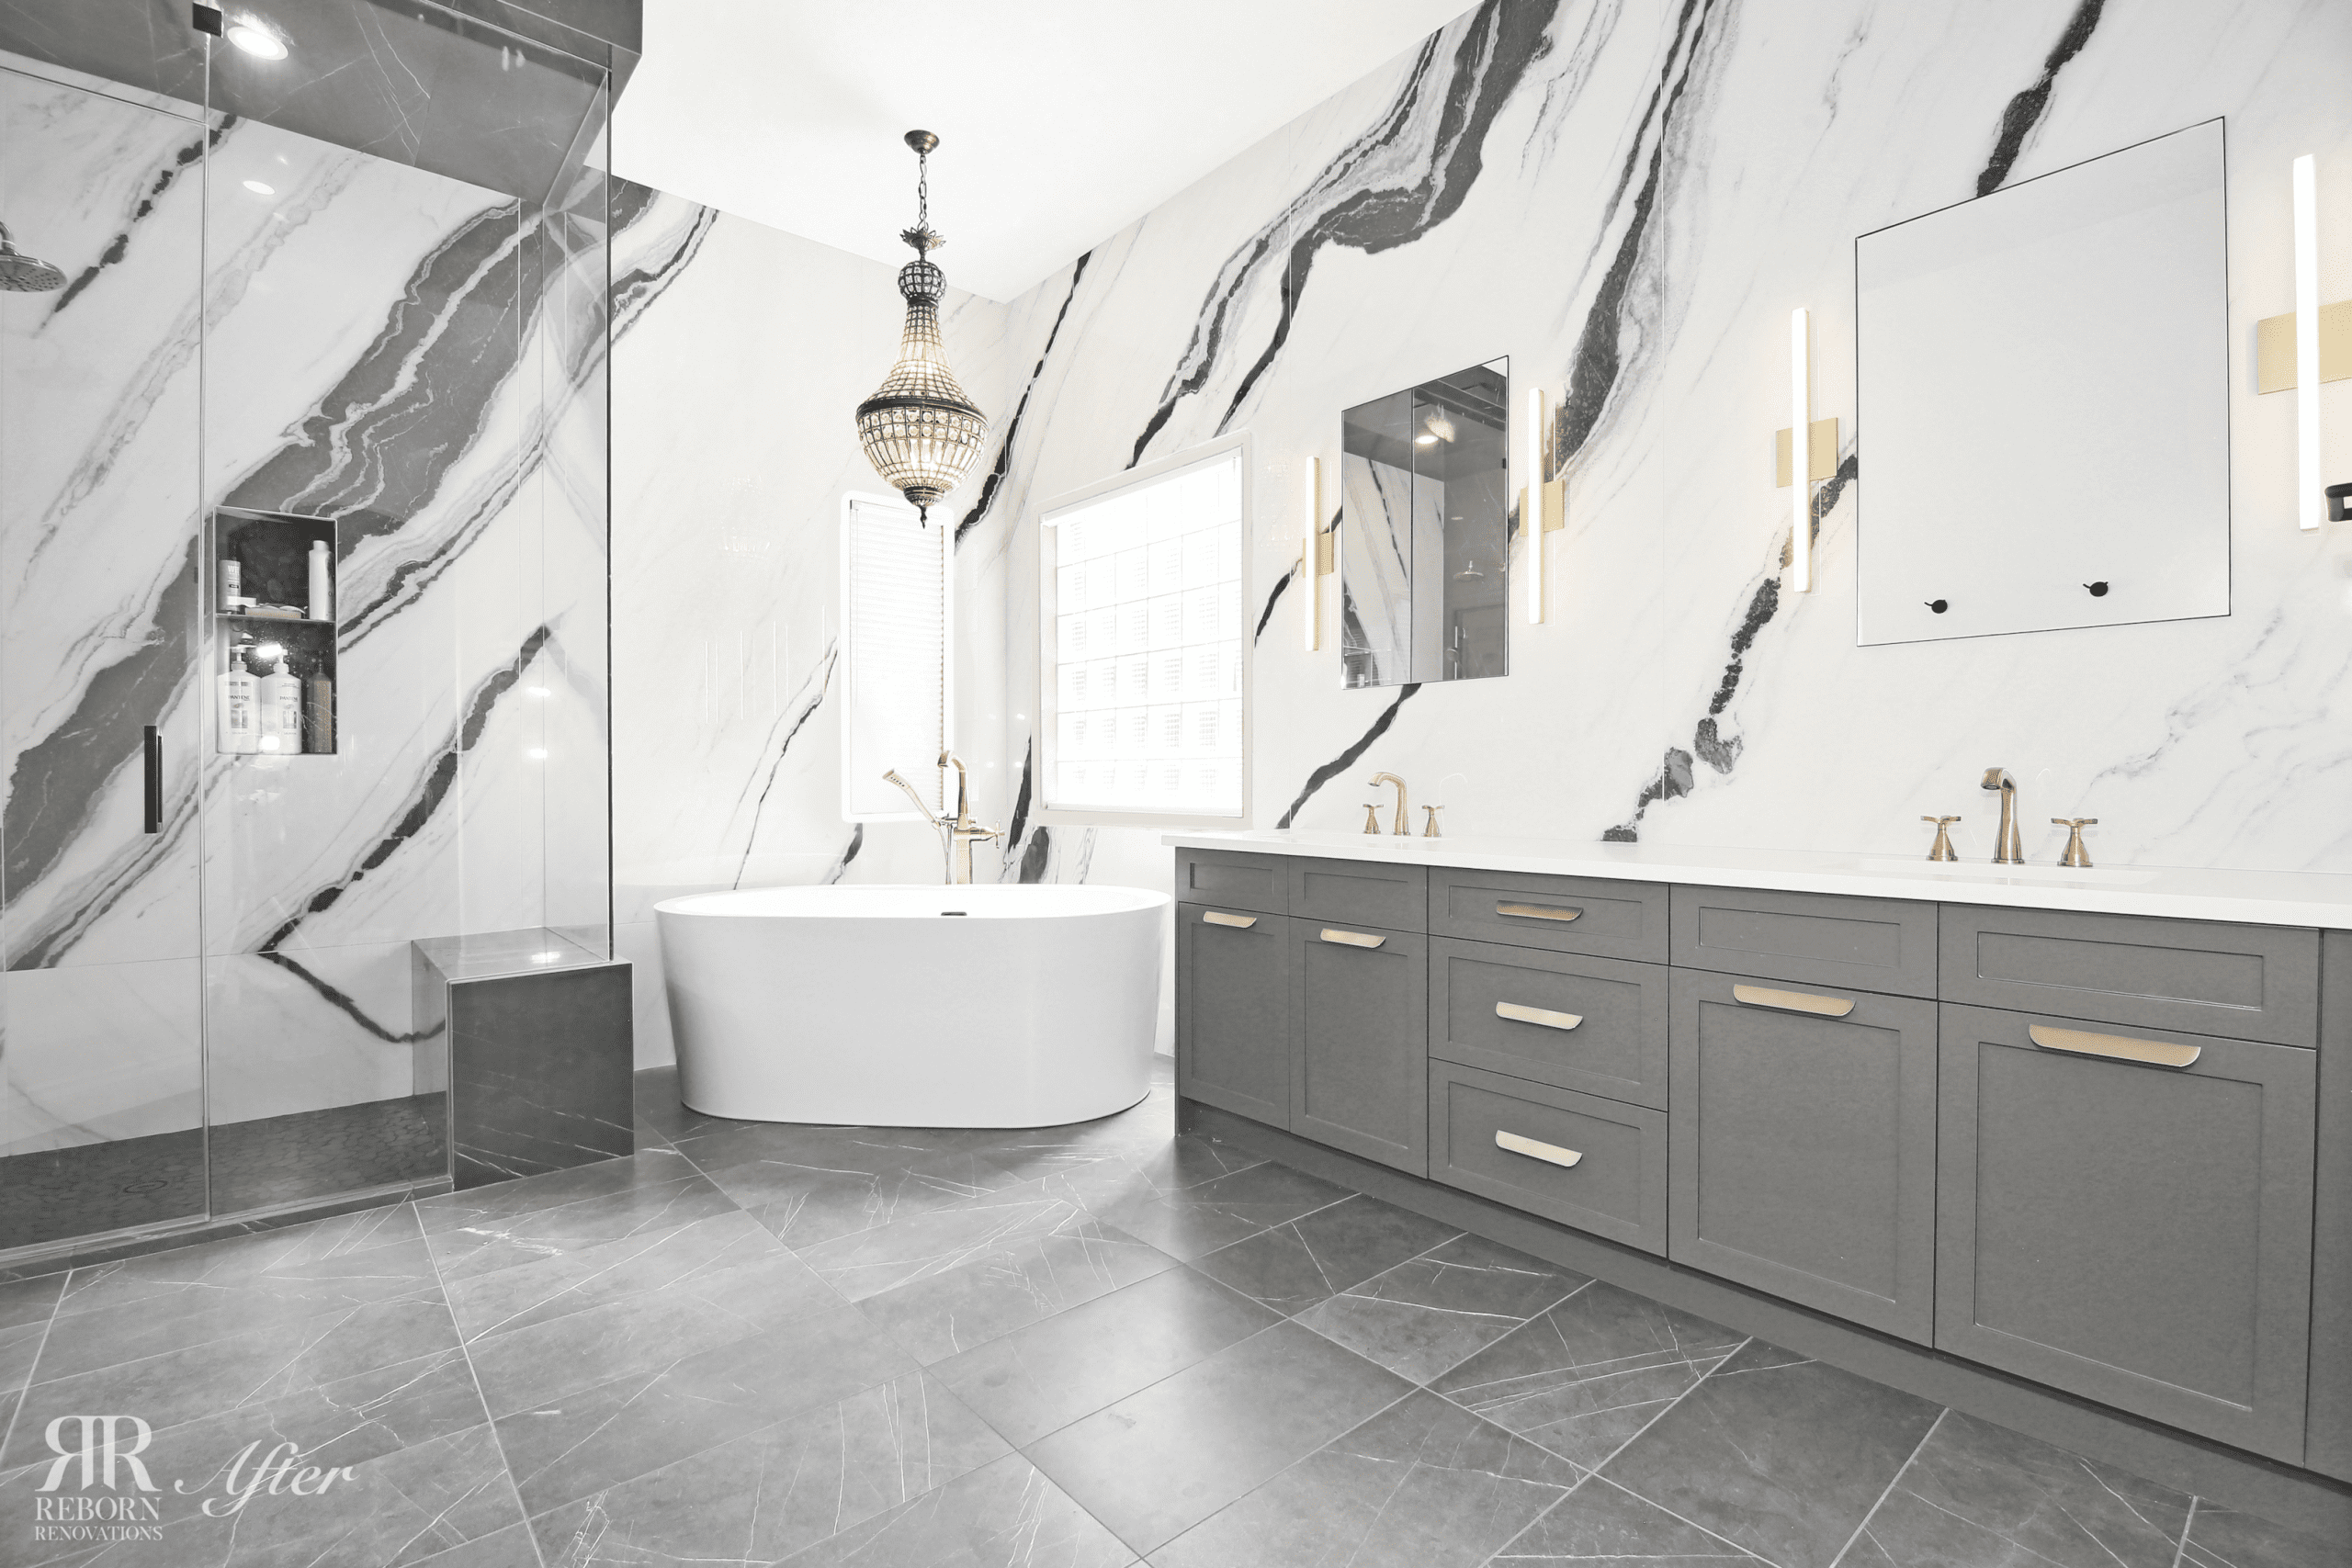 A modern bathroom with marble walls and a tub, providing tips to modernize an older home.